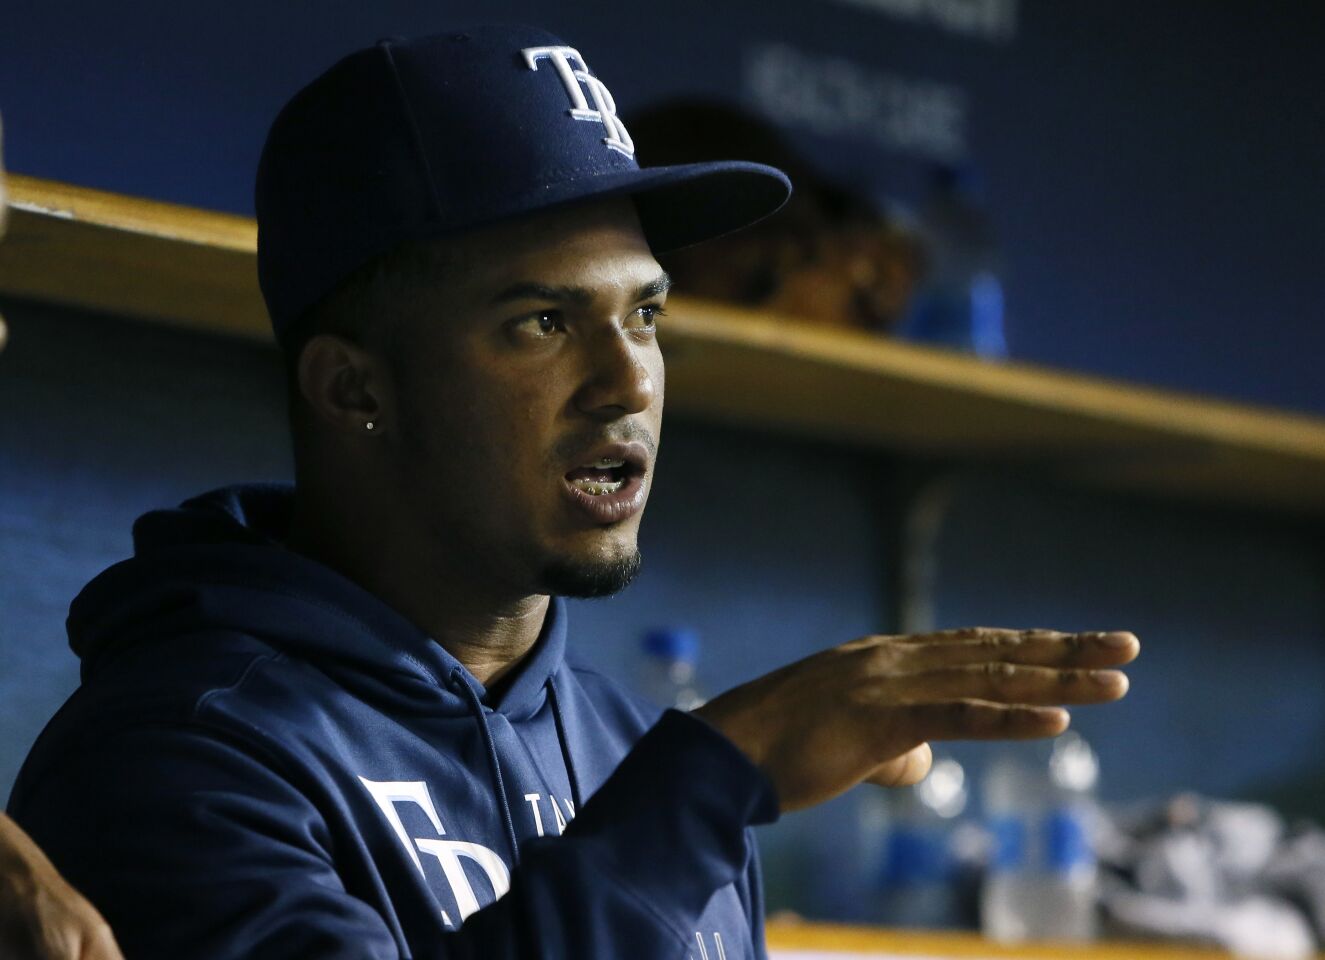 3 | Tampa Bay Rays (89-54; LW: 2)Holding their breath: Standout rookie Wander Franco left Friday’s game with a hamstring injury and hit the injured list, a significant hit to the Rays’ World Series hopes if he’s out heading into the postseason.